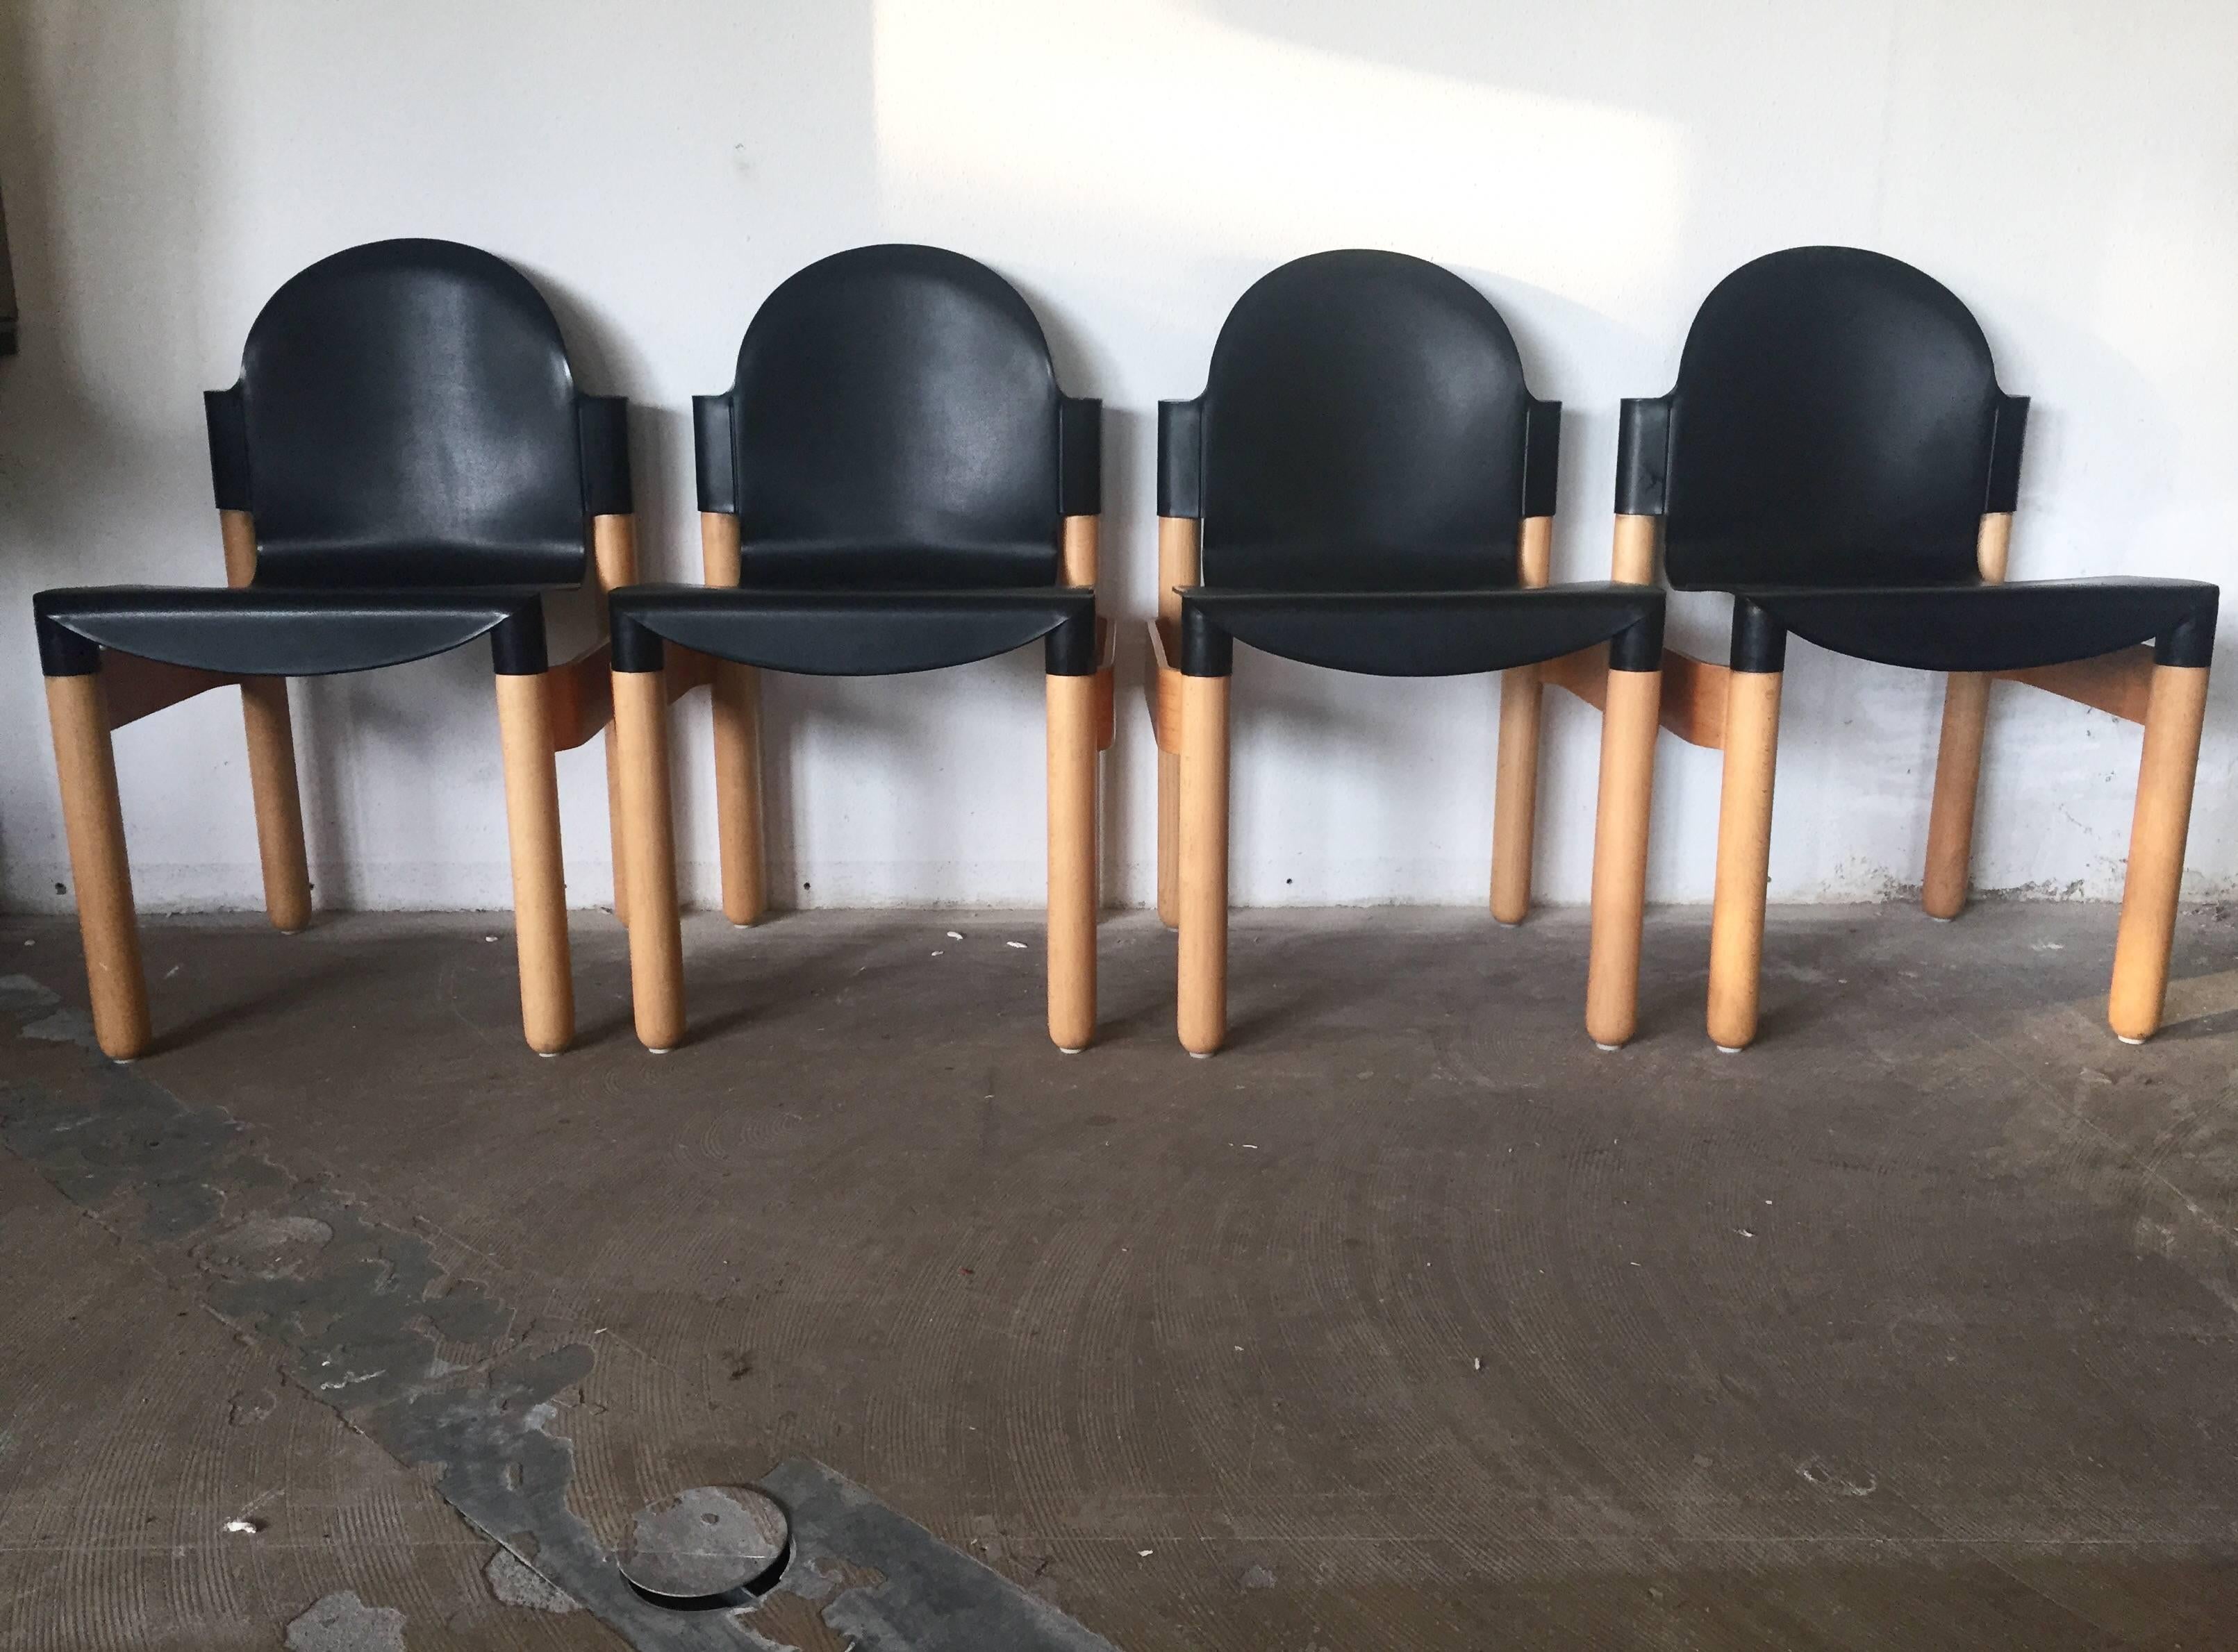 Set of four stacking chairs designed by Gerd Lange in 1983. They were manufactured in The Netherlands. They come with an artificial seating and beech frame. The set is marked with the manufacturer's name and remain in a very good condition with